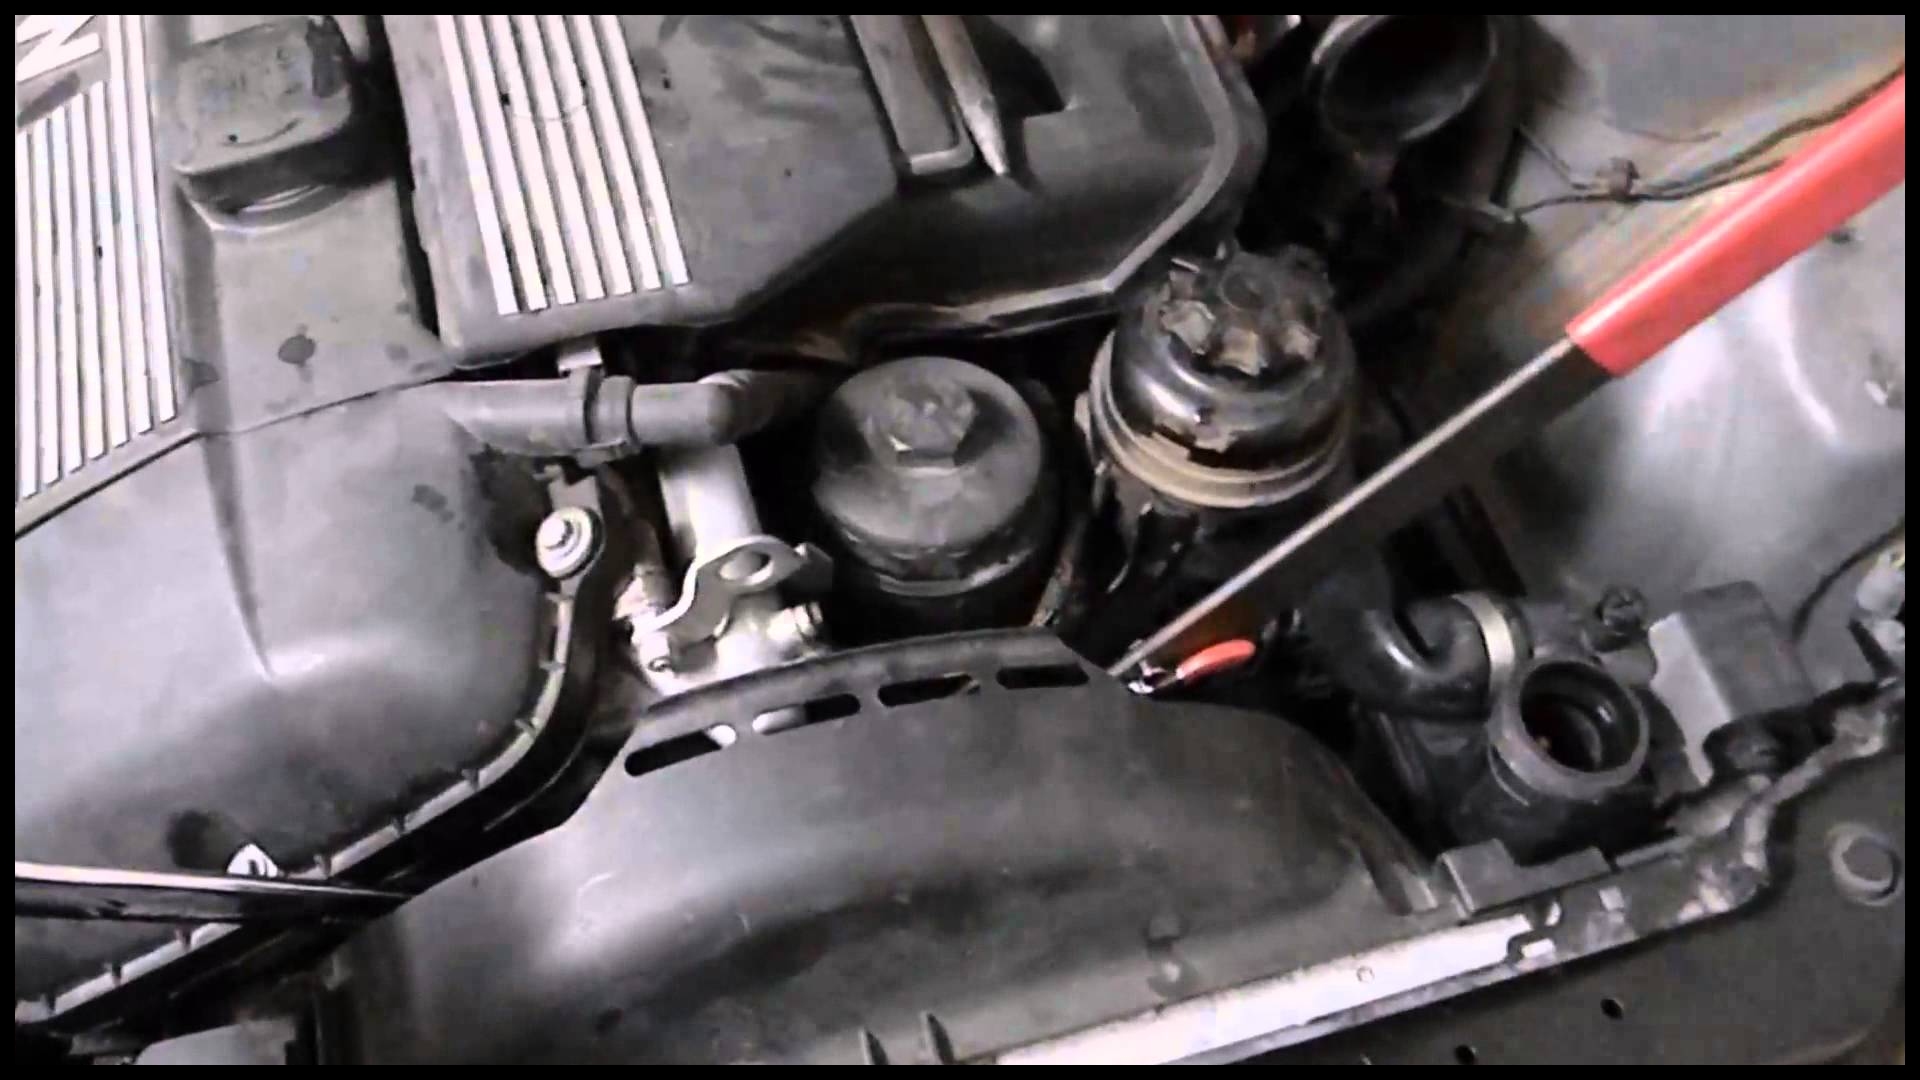 HOW TO REPLACE WATER PUMP ON BMW325i REPLACING WATER PUMP ON BMW 325i PART 2